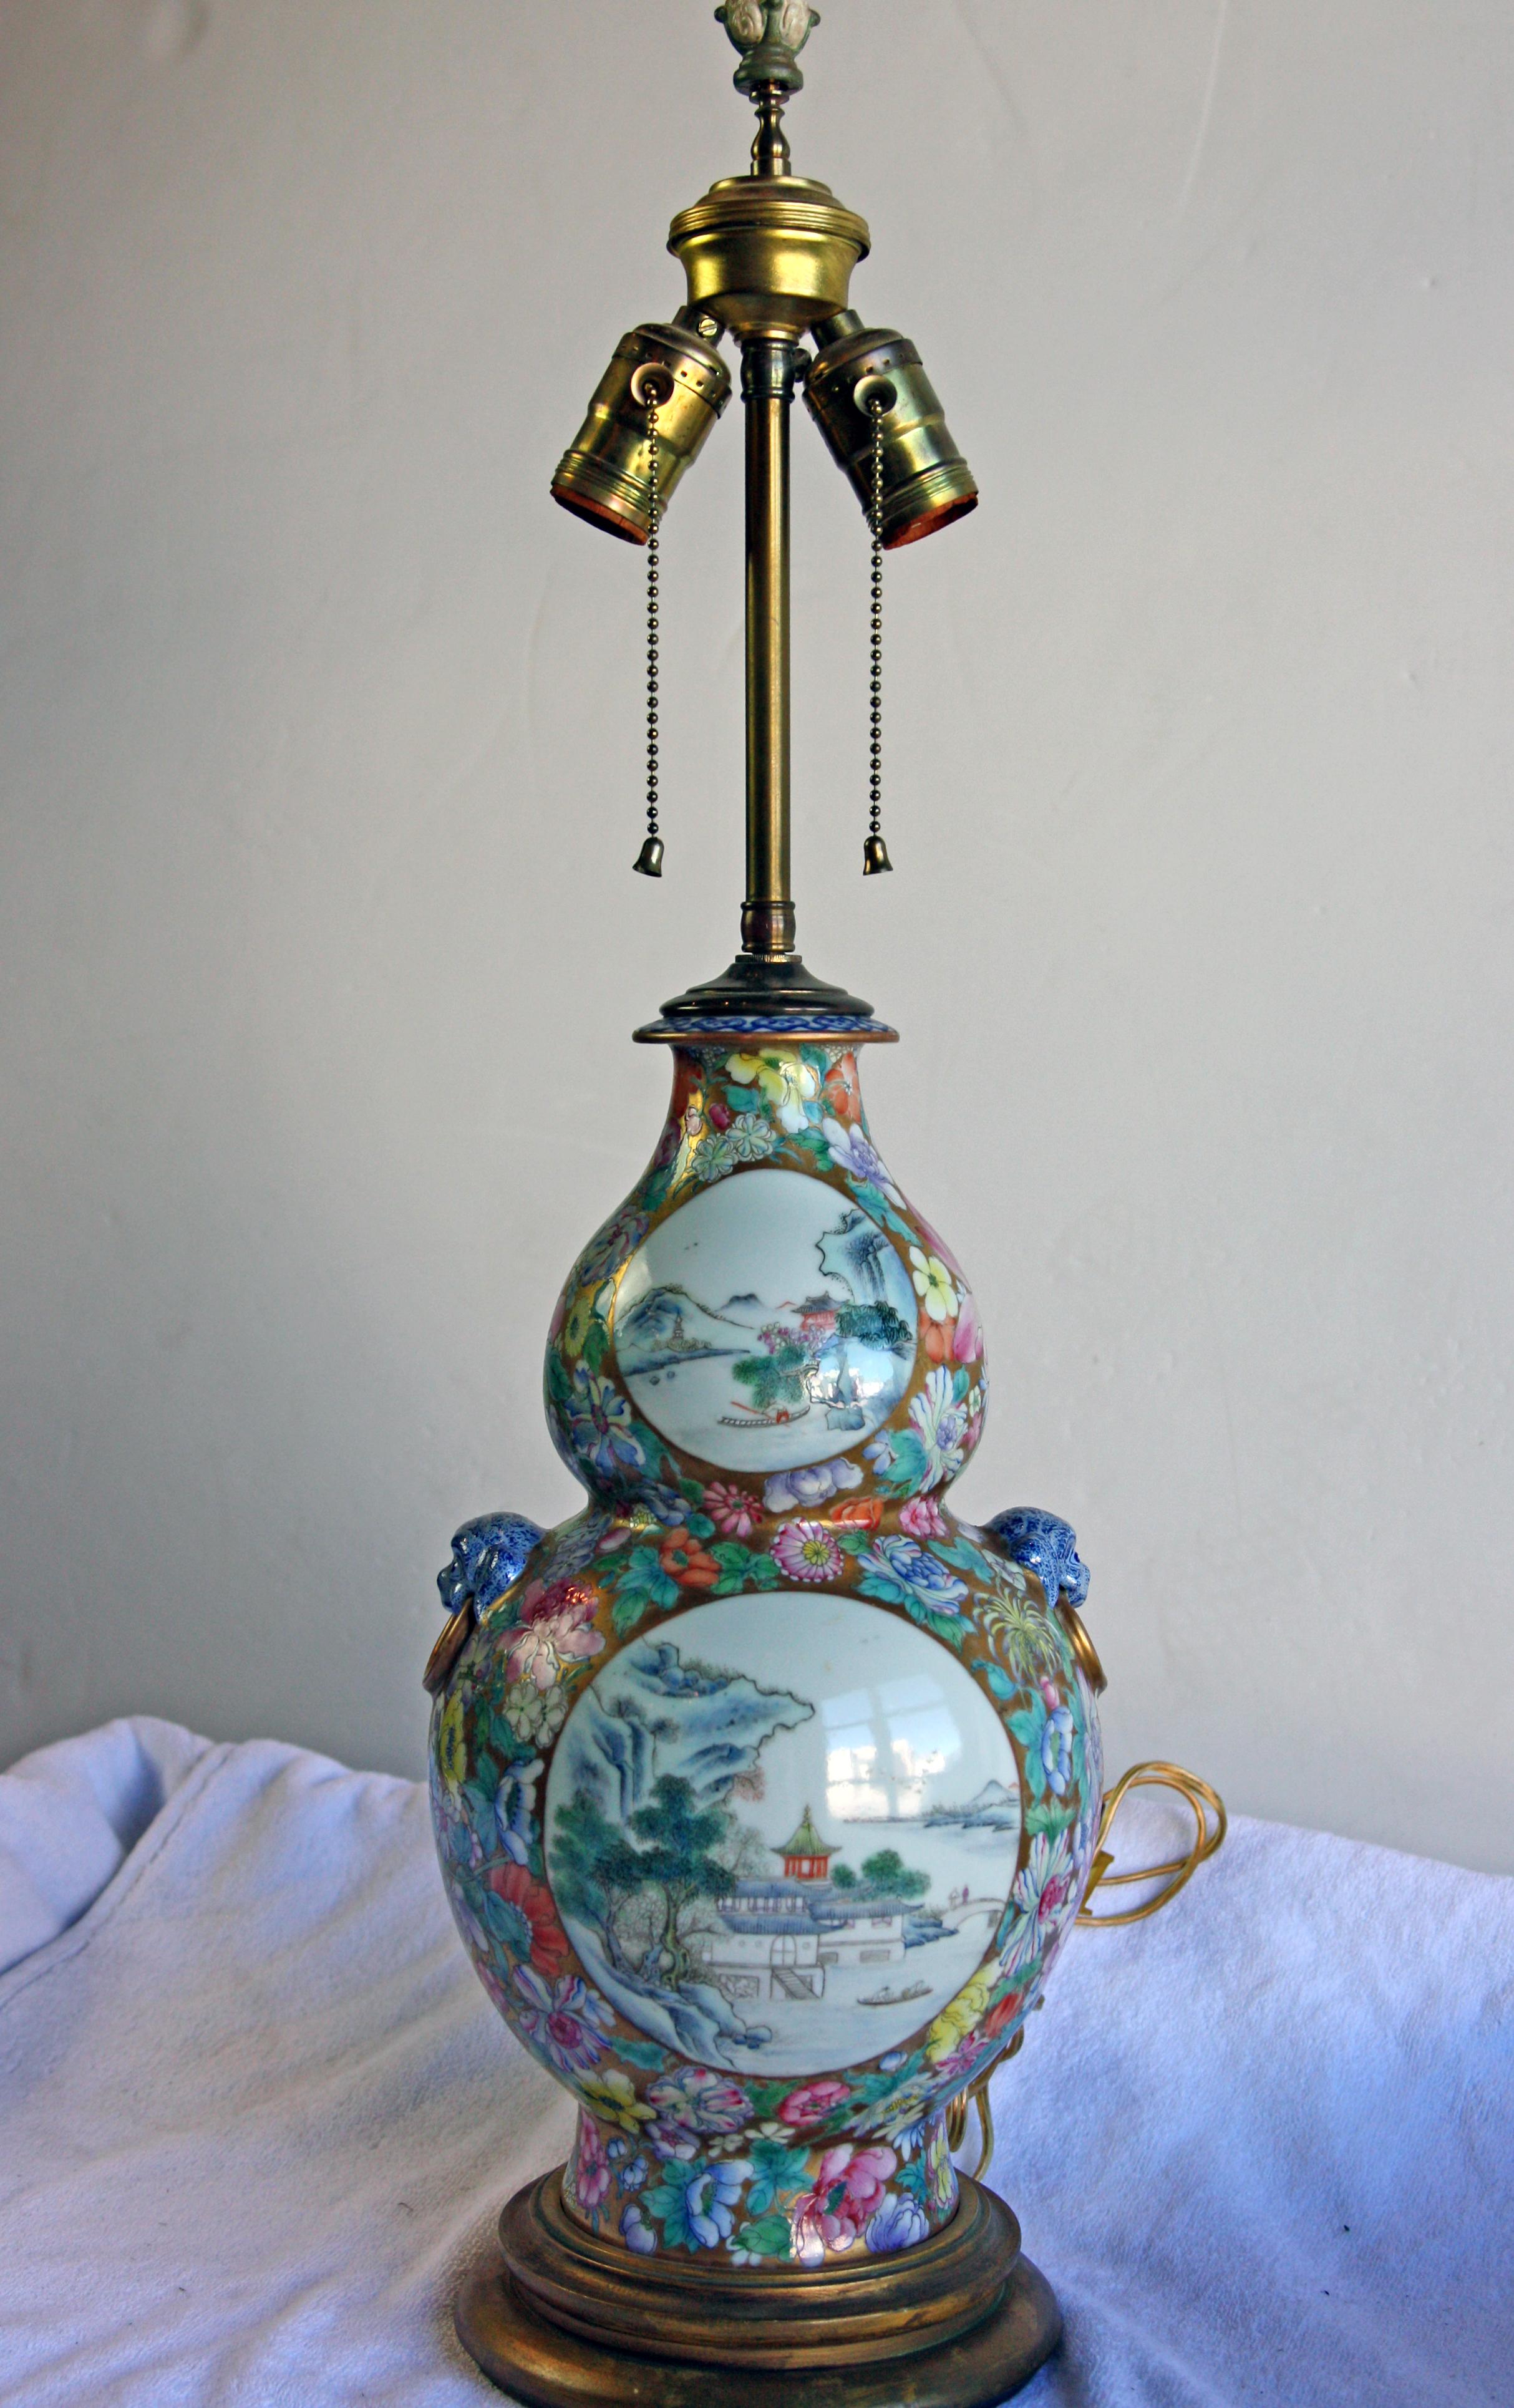 Beautifully hand painted Chinese double-gourd lamp. Sits on a wood base with a carved ornamental finial. Shade included.